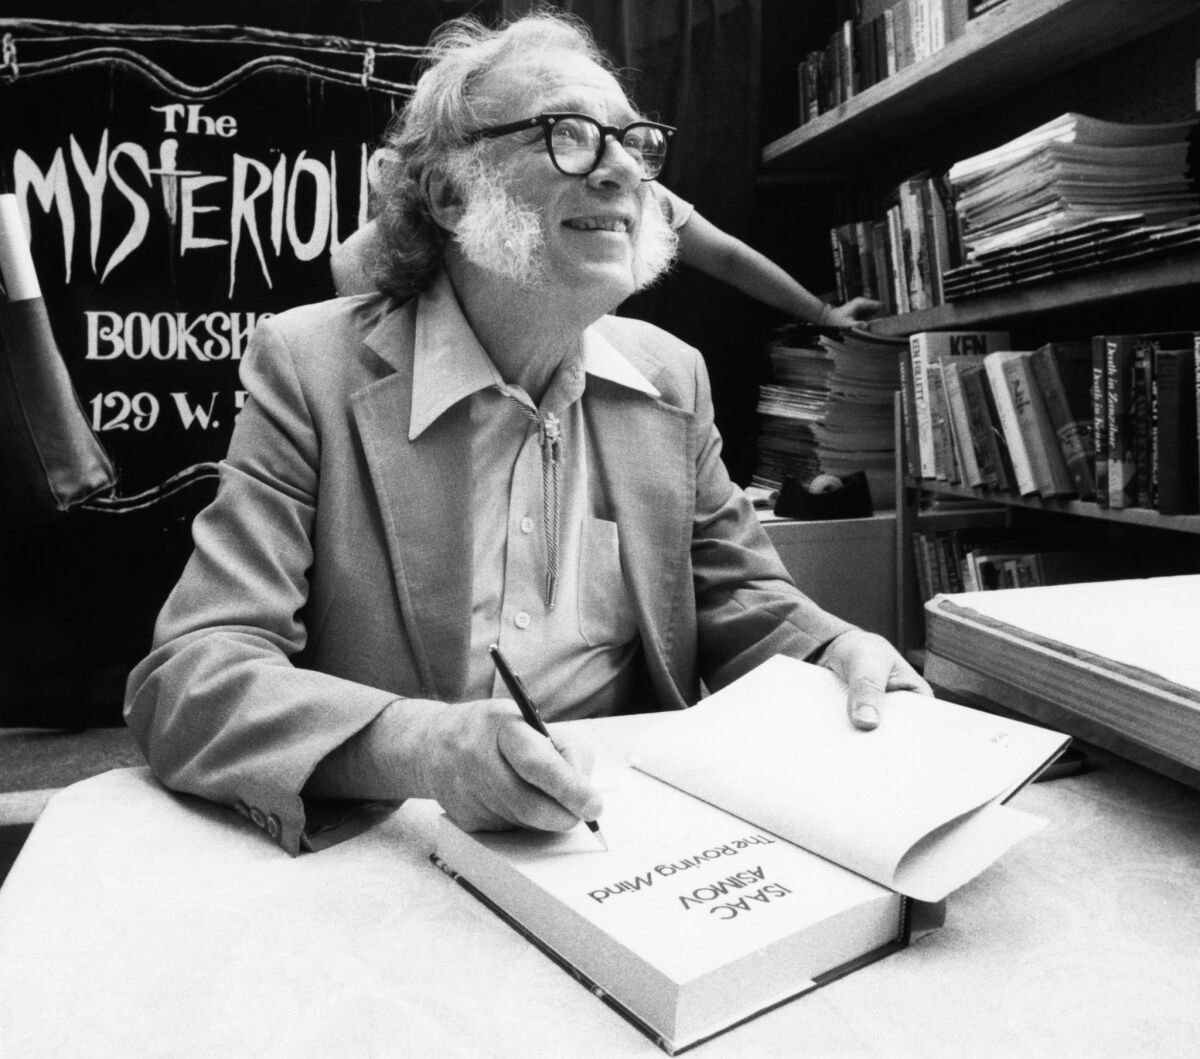 The "Foundation" books of Isaac Asimov, who is shown in 1984, may be getting a screen adaptation by Apple TV.